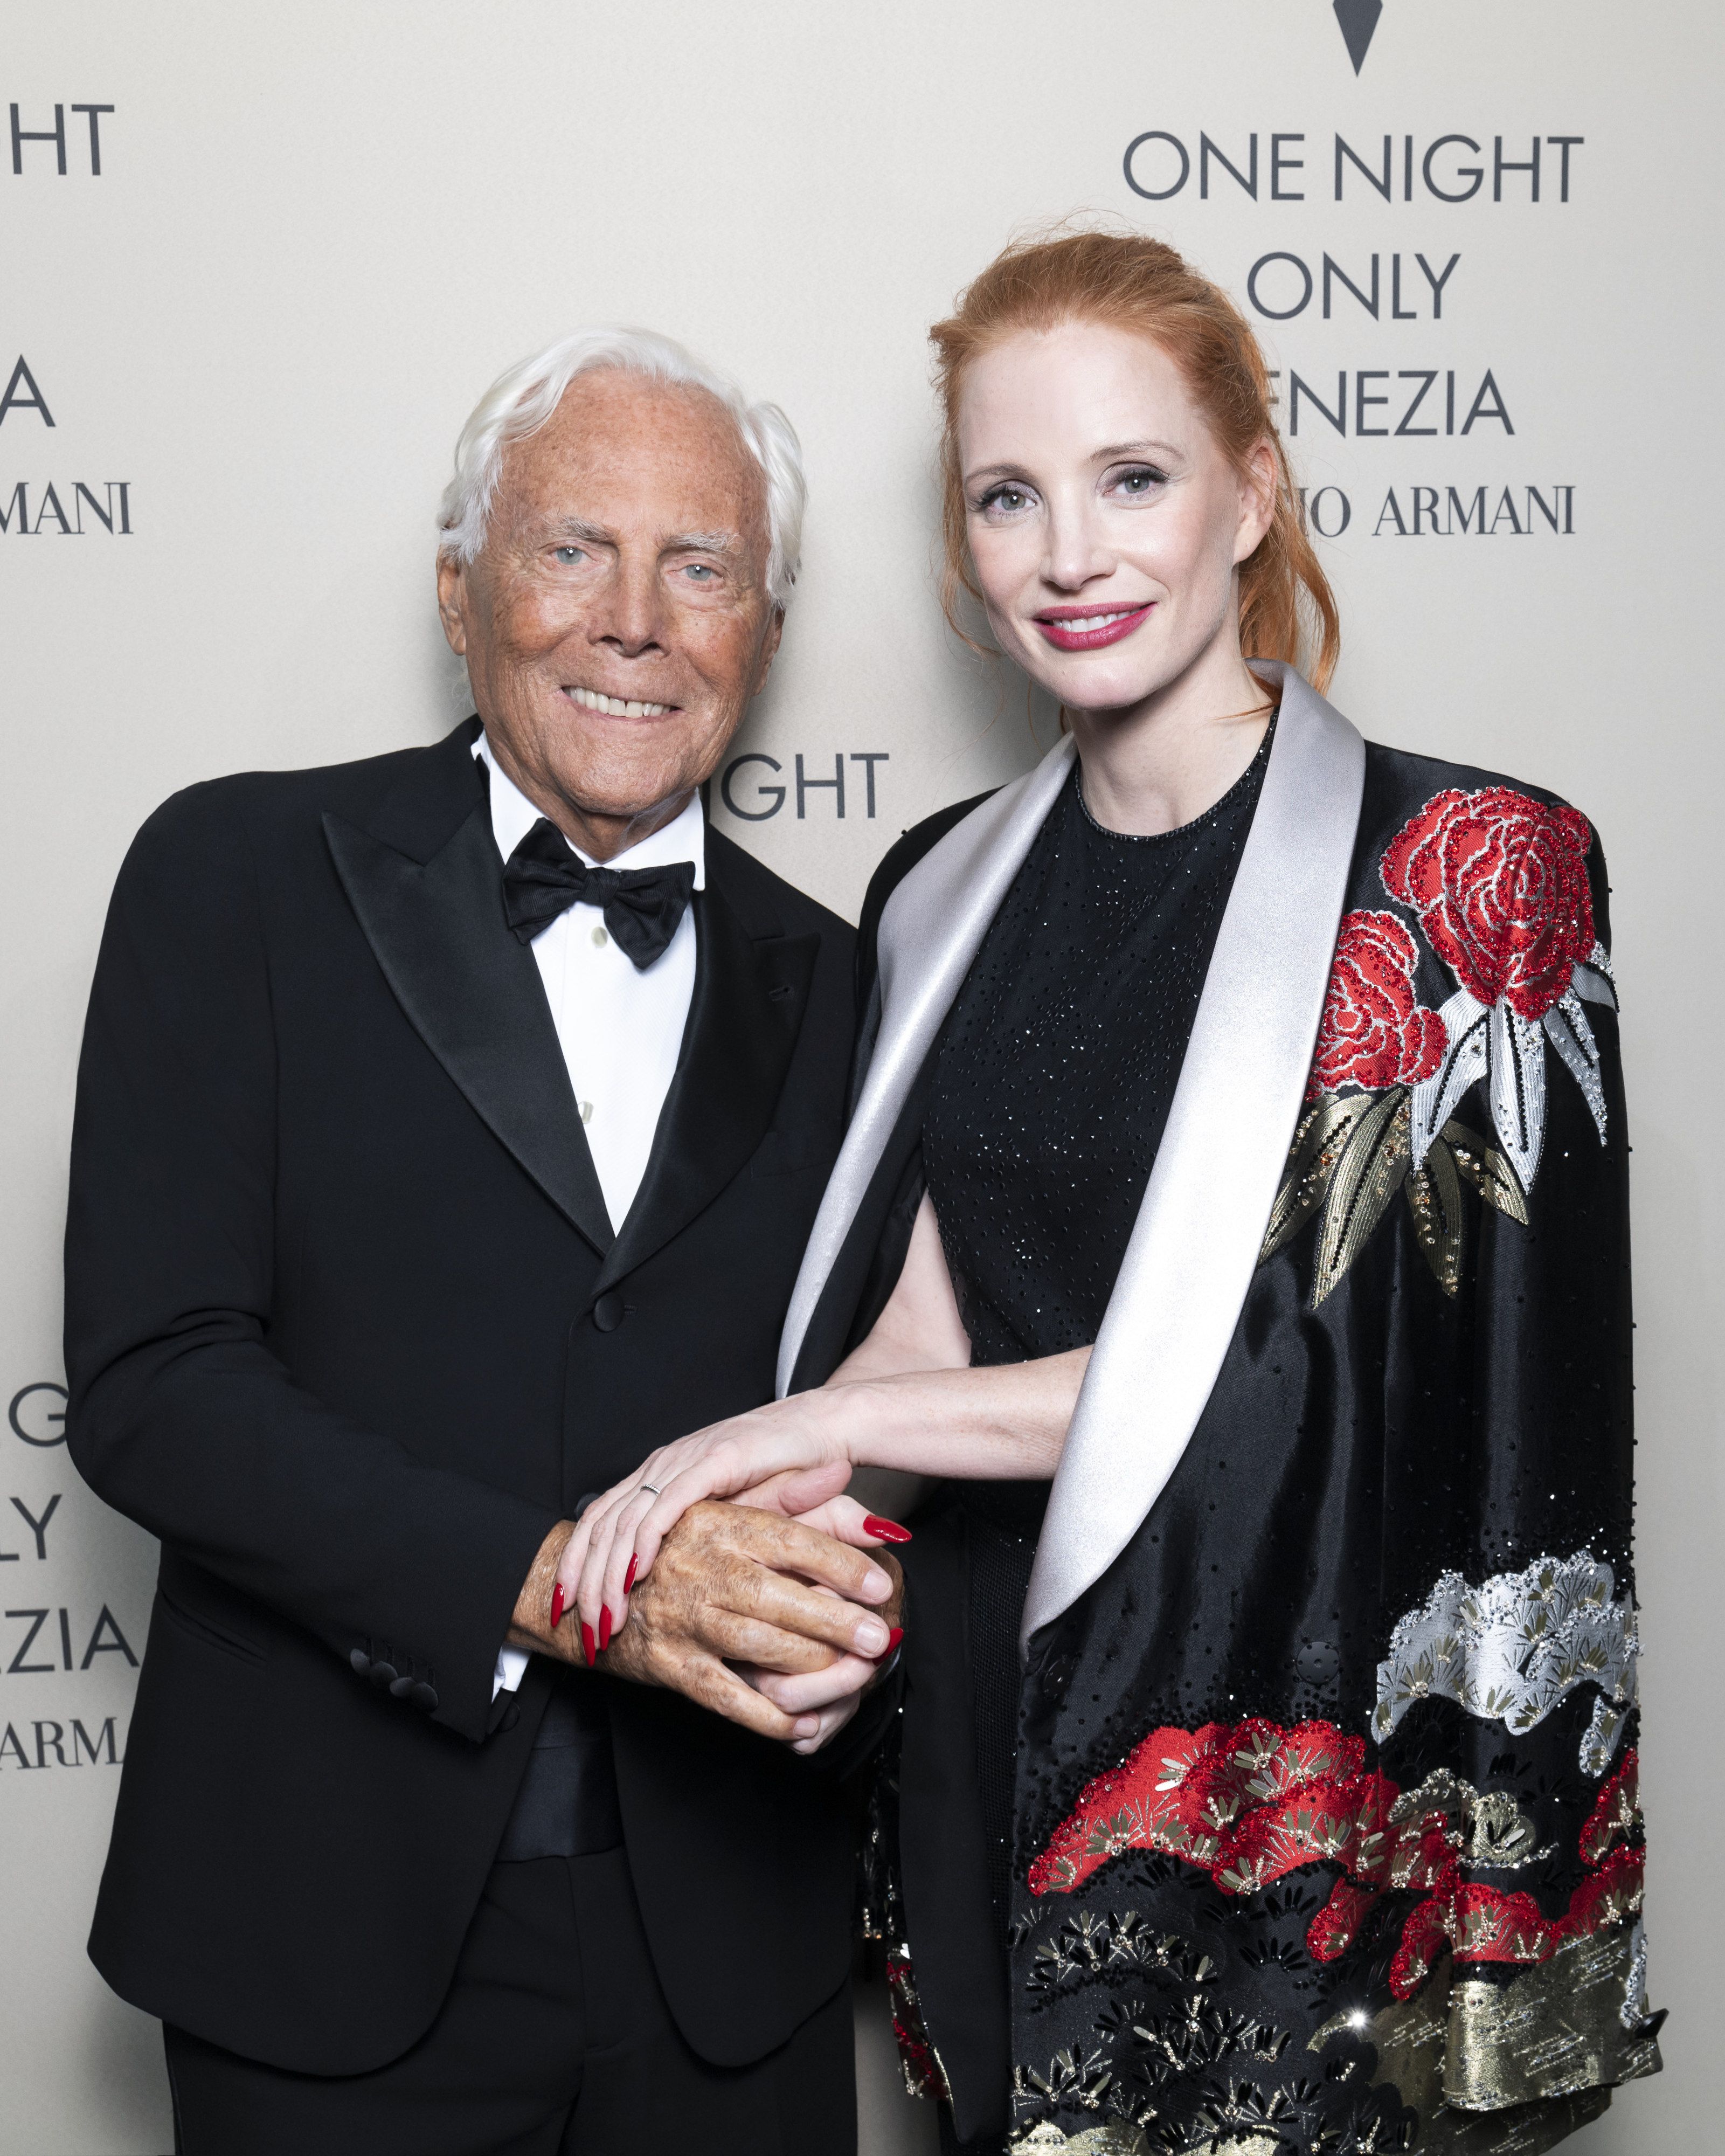 Photos from Giorgio Armani's One Night Only Party in Venice 2023